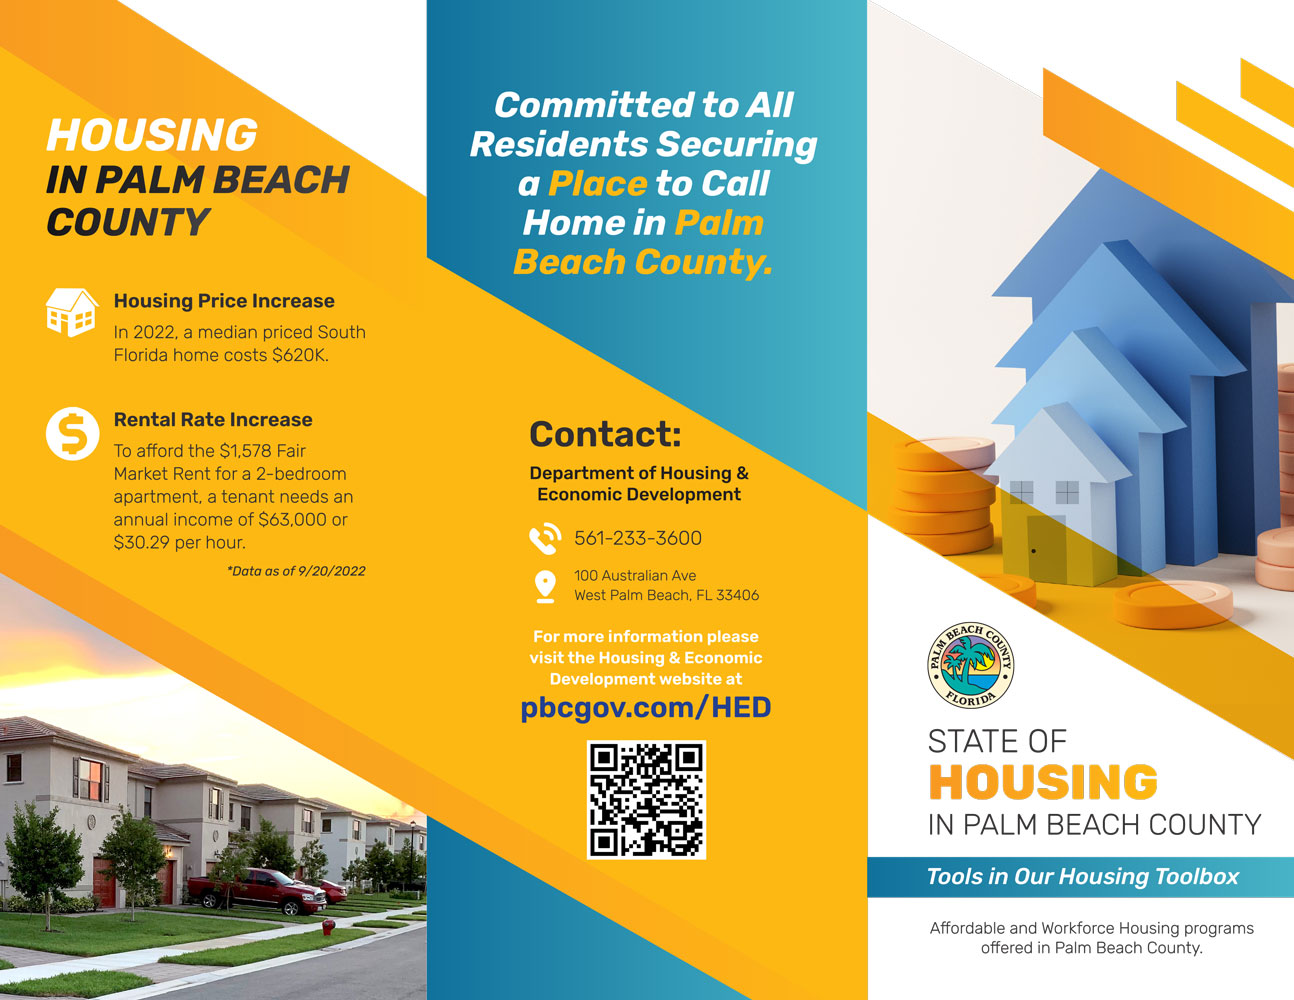 State of Housing in Palm Beach County front trifold image